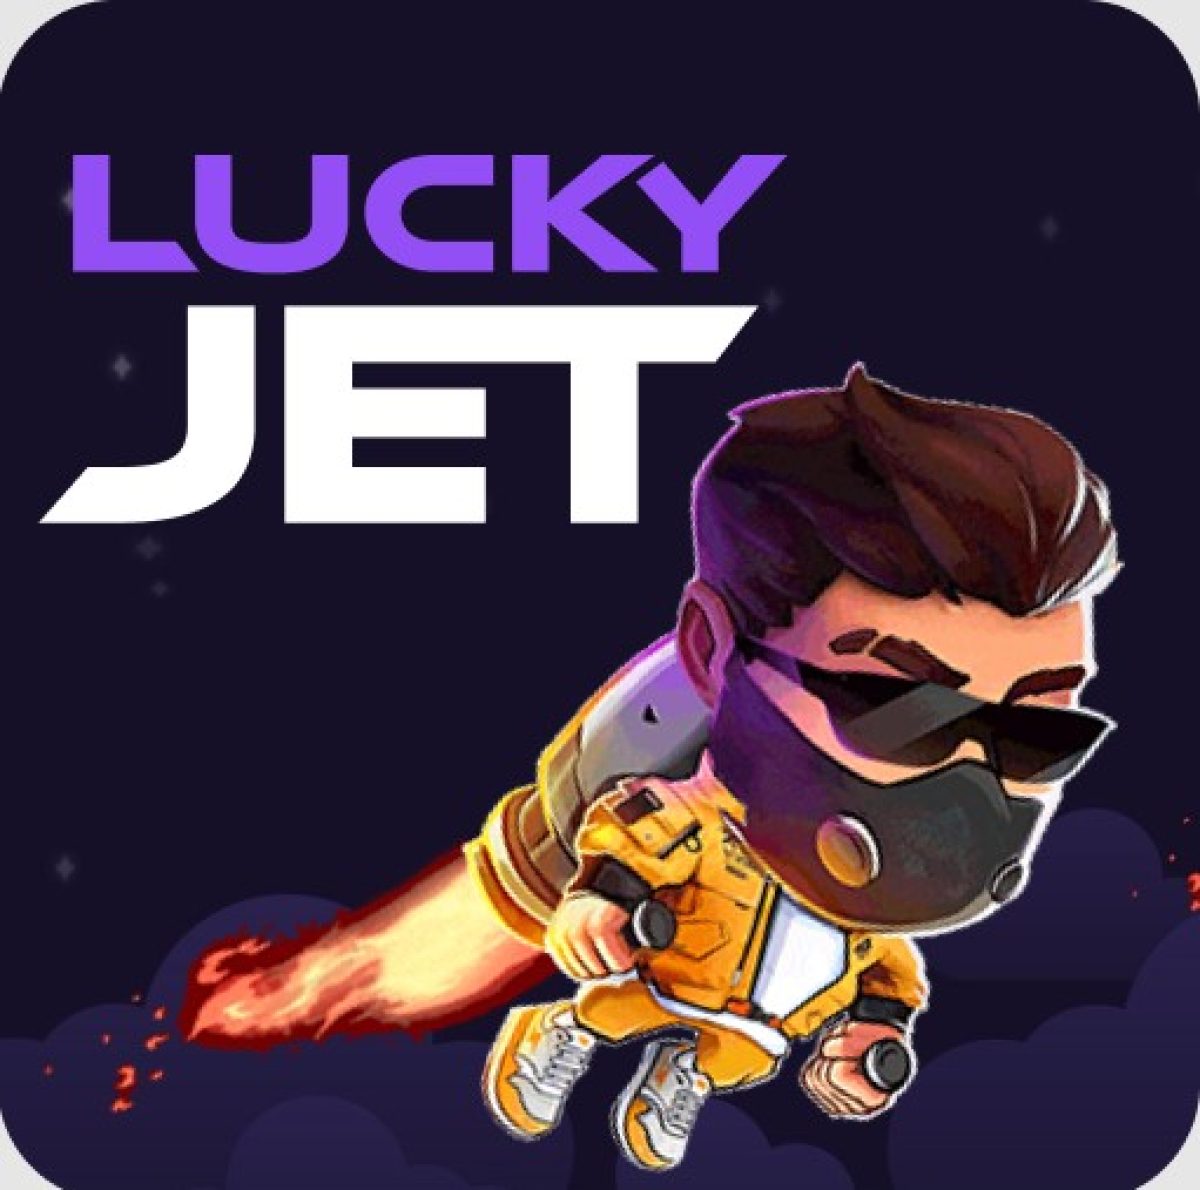 Everything You Wanted to Know About 1 win lucky jet and Were Too Embarrassed to Ask